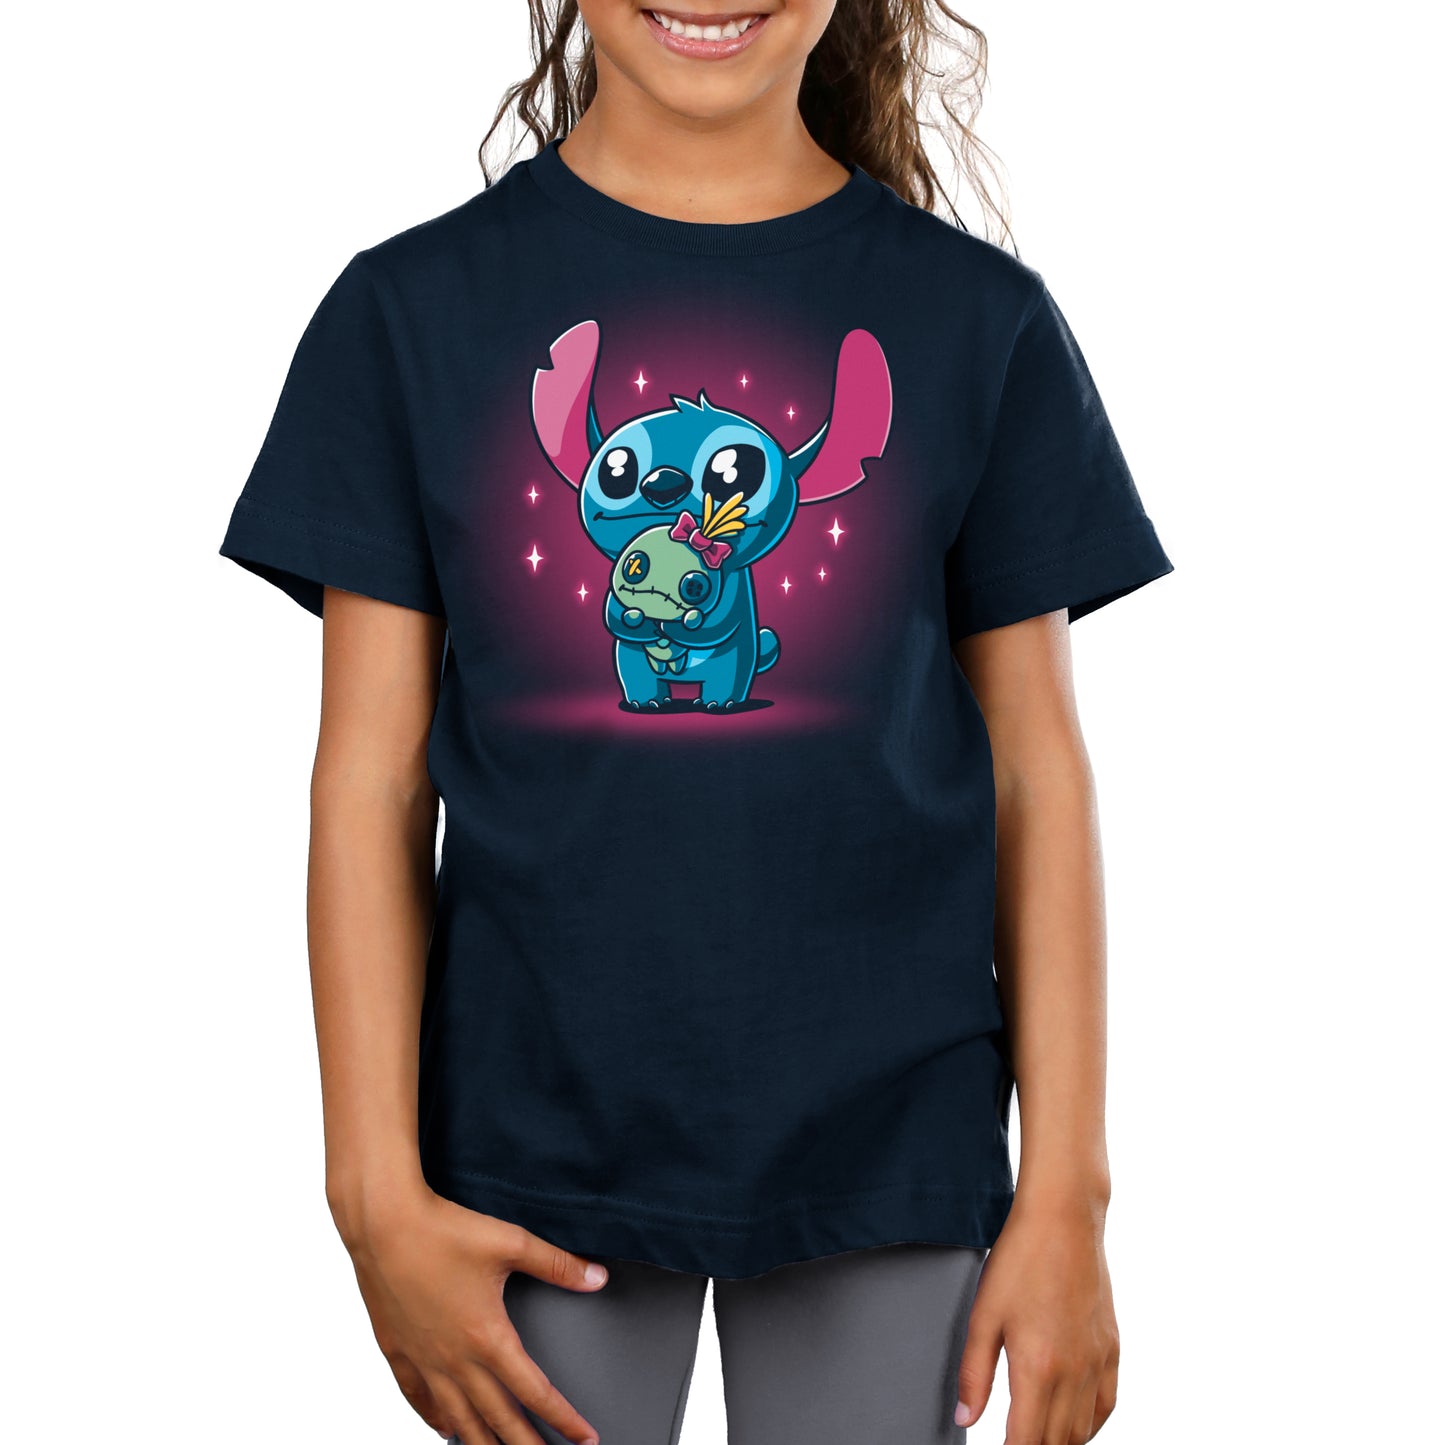 Officially licensed Disney kids T-shirt featuring Stitch and Scrump.